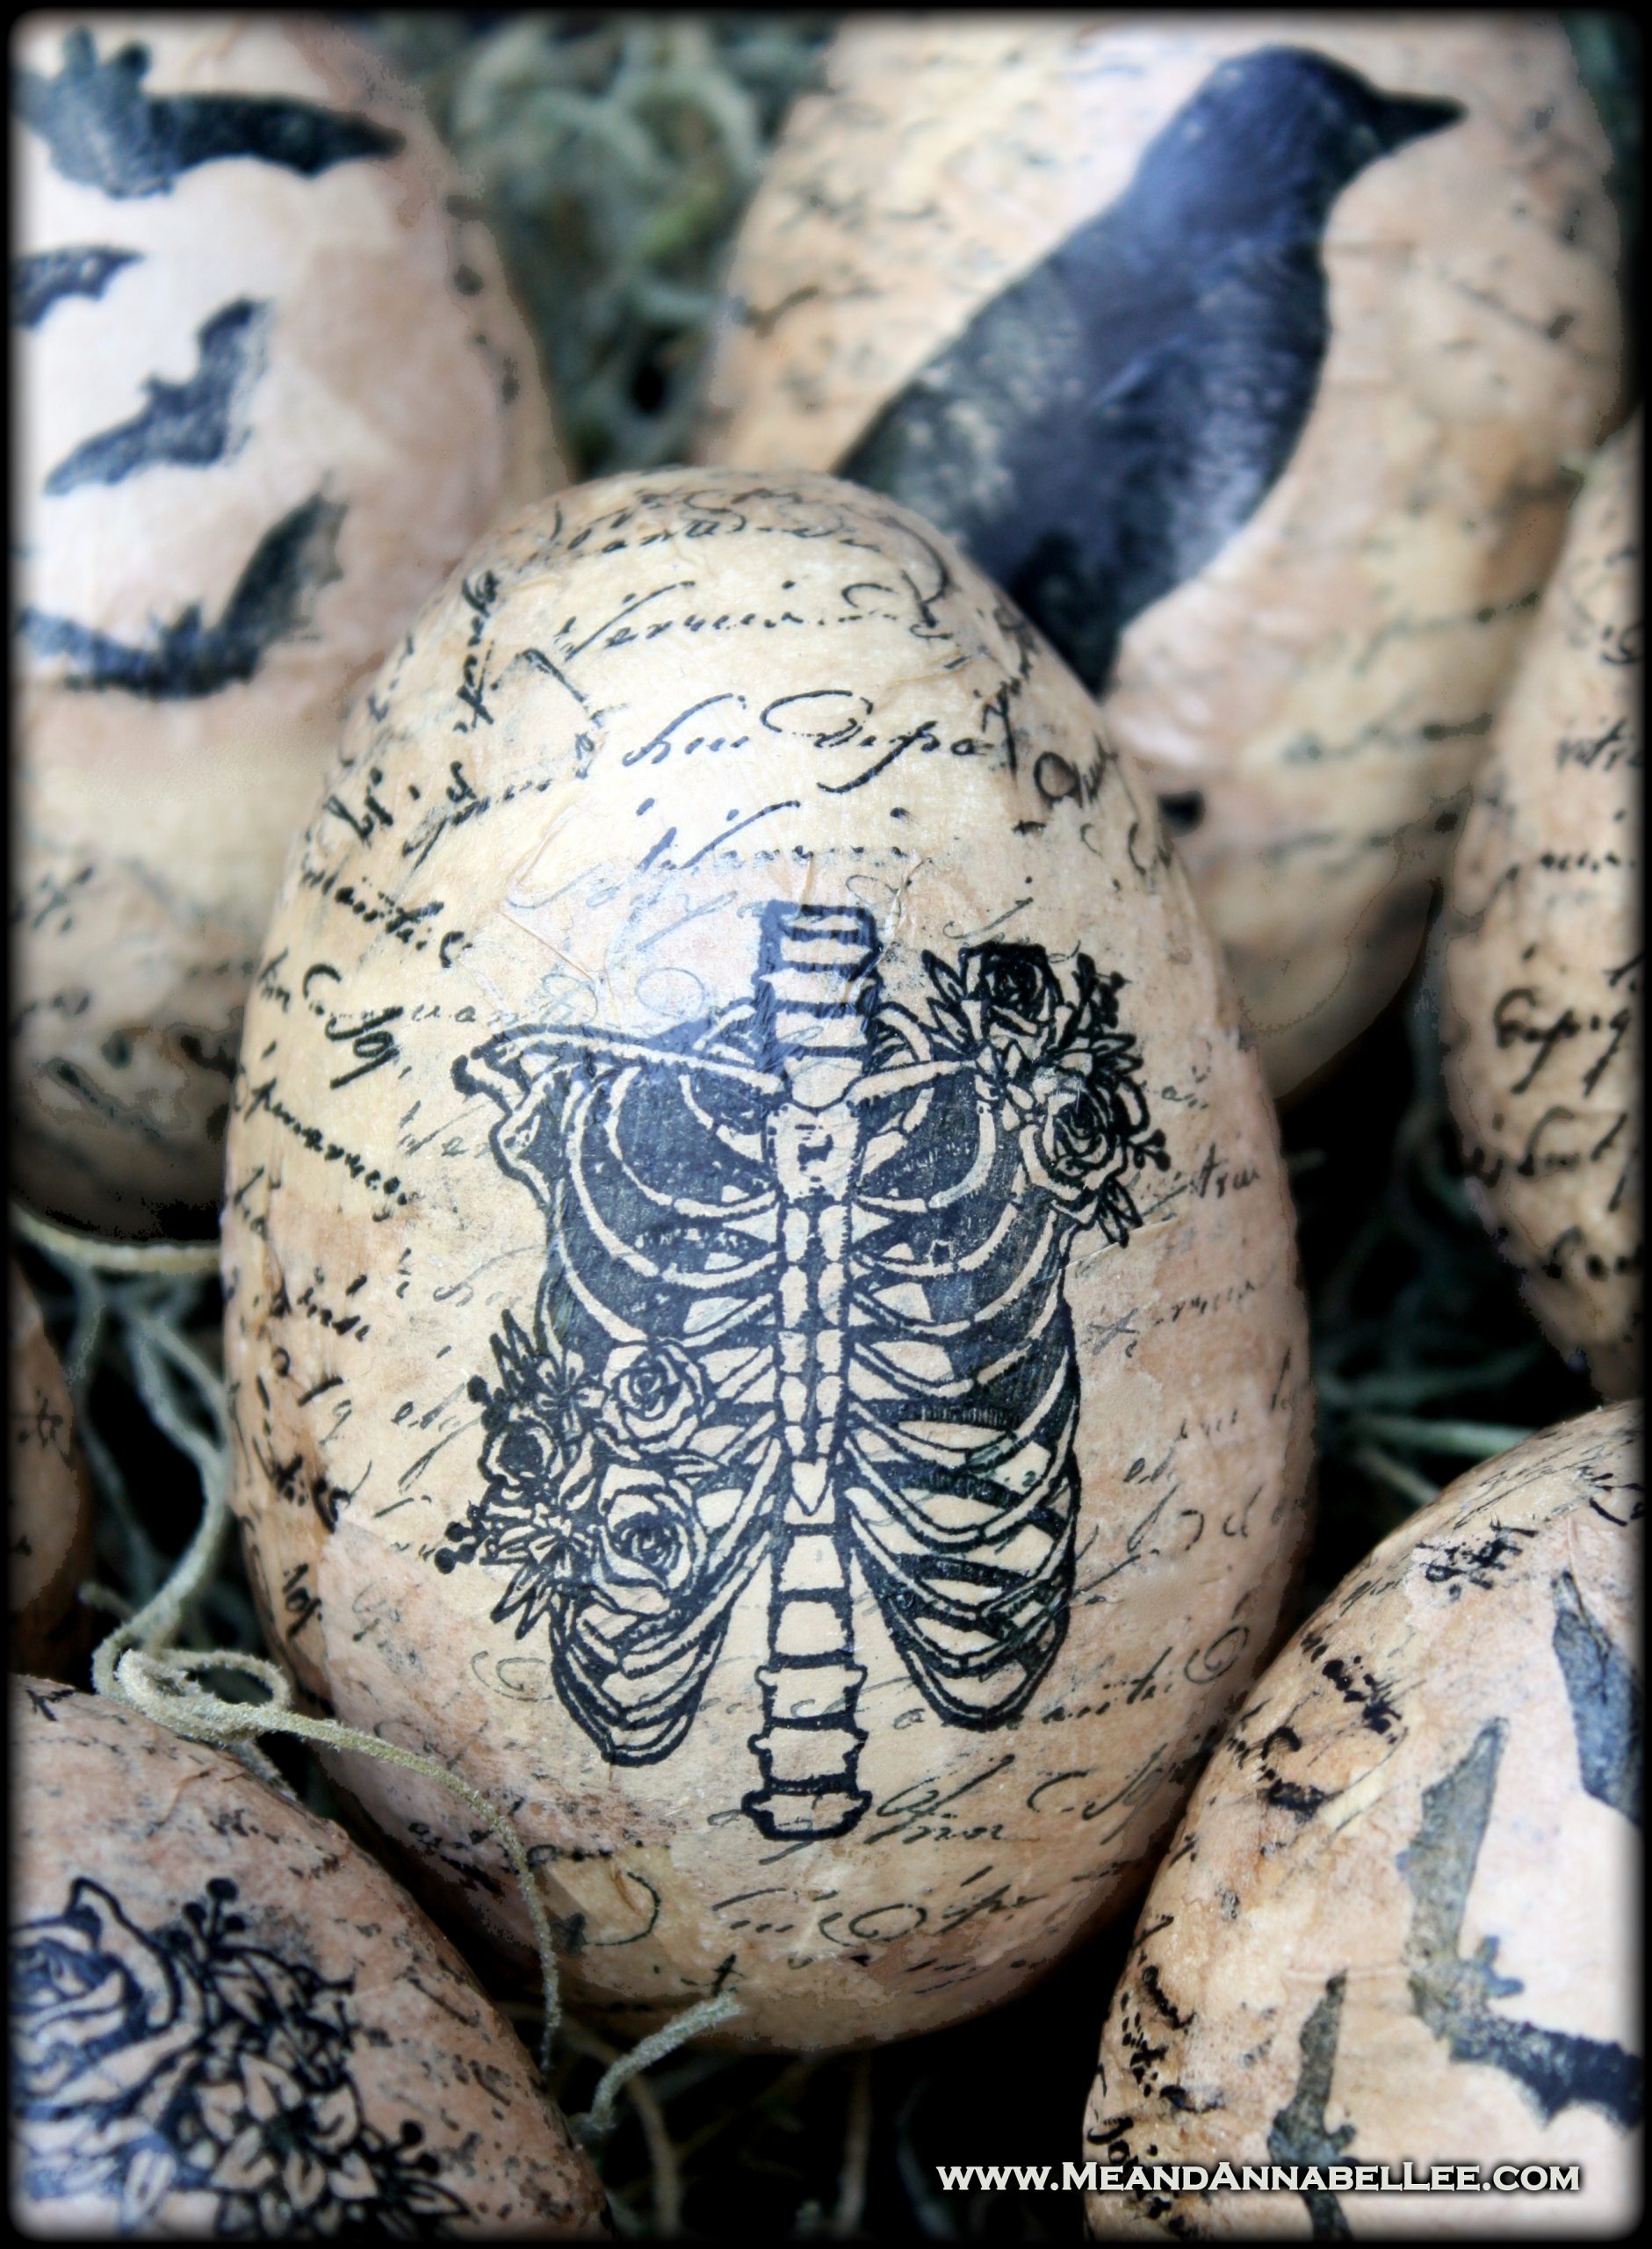 Bring some Halloween inspiration into your Spring Décor this year with these DIY Gothic Decoupage Eggs | Transform Plastic Easter Eggs into Gothic Spring Décor with this easy and inexpensive project using Halloween inspired Stamps | Skeleton Ribcage | A SpringOWeen Goth It Yourself Project | Me and Annabel Lee Blog